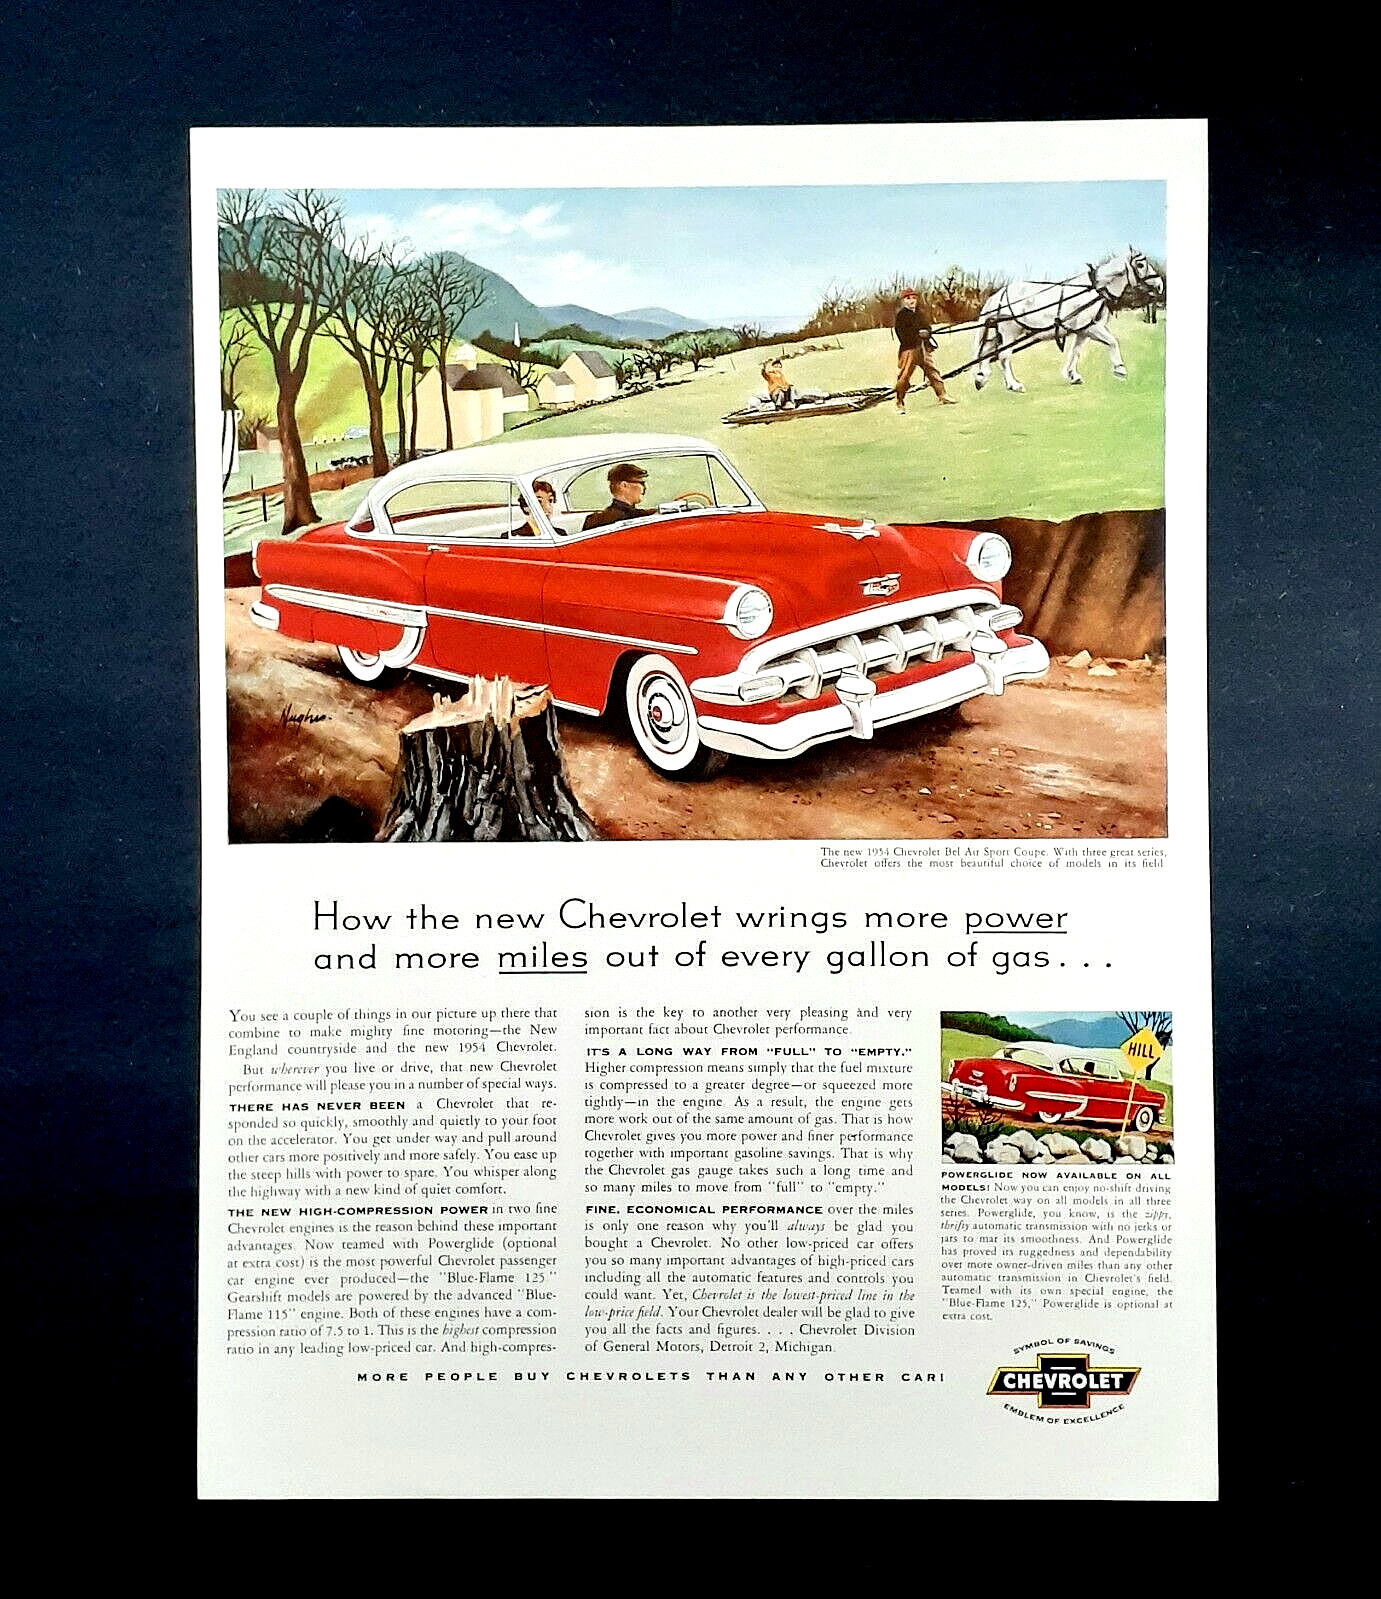 Chevy Bel Air car ad vintage 1954 red sport coupe automobile advertisement